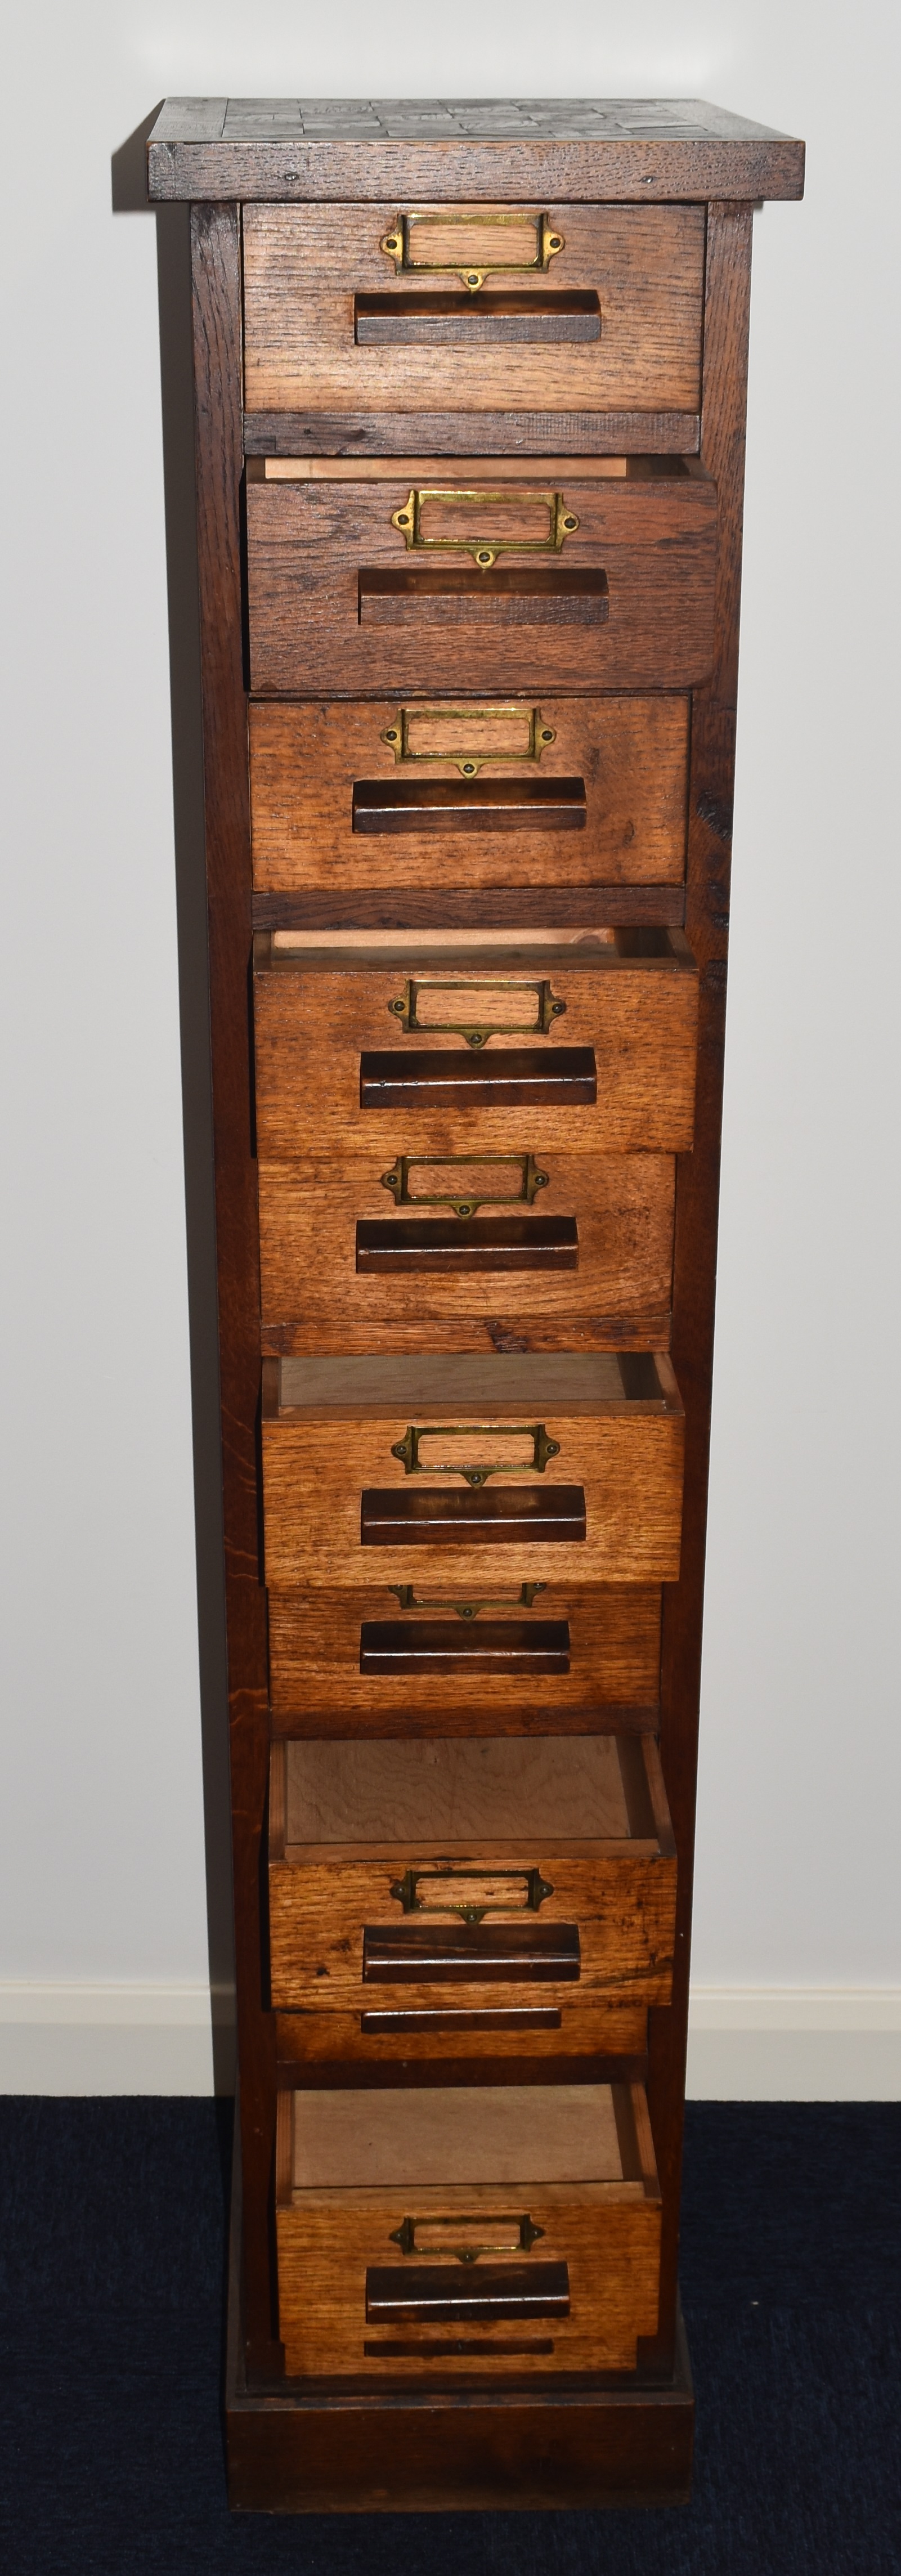 Oak collector's chest of eleven drawers with parquetry decoration, W30.5 x D40 x H147cm - Image 2 of 5